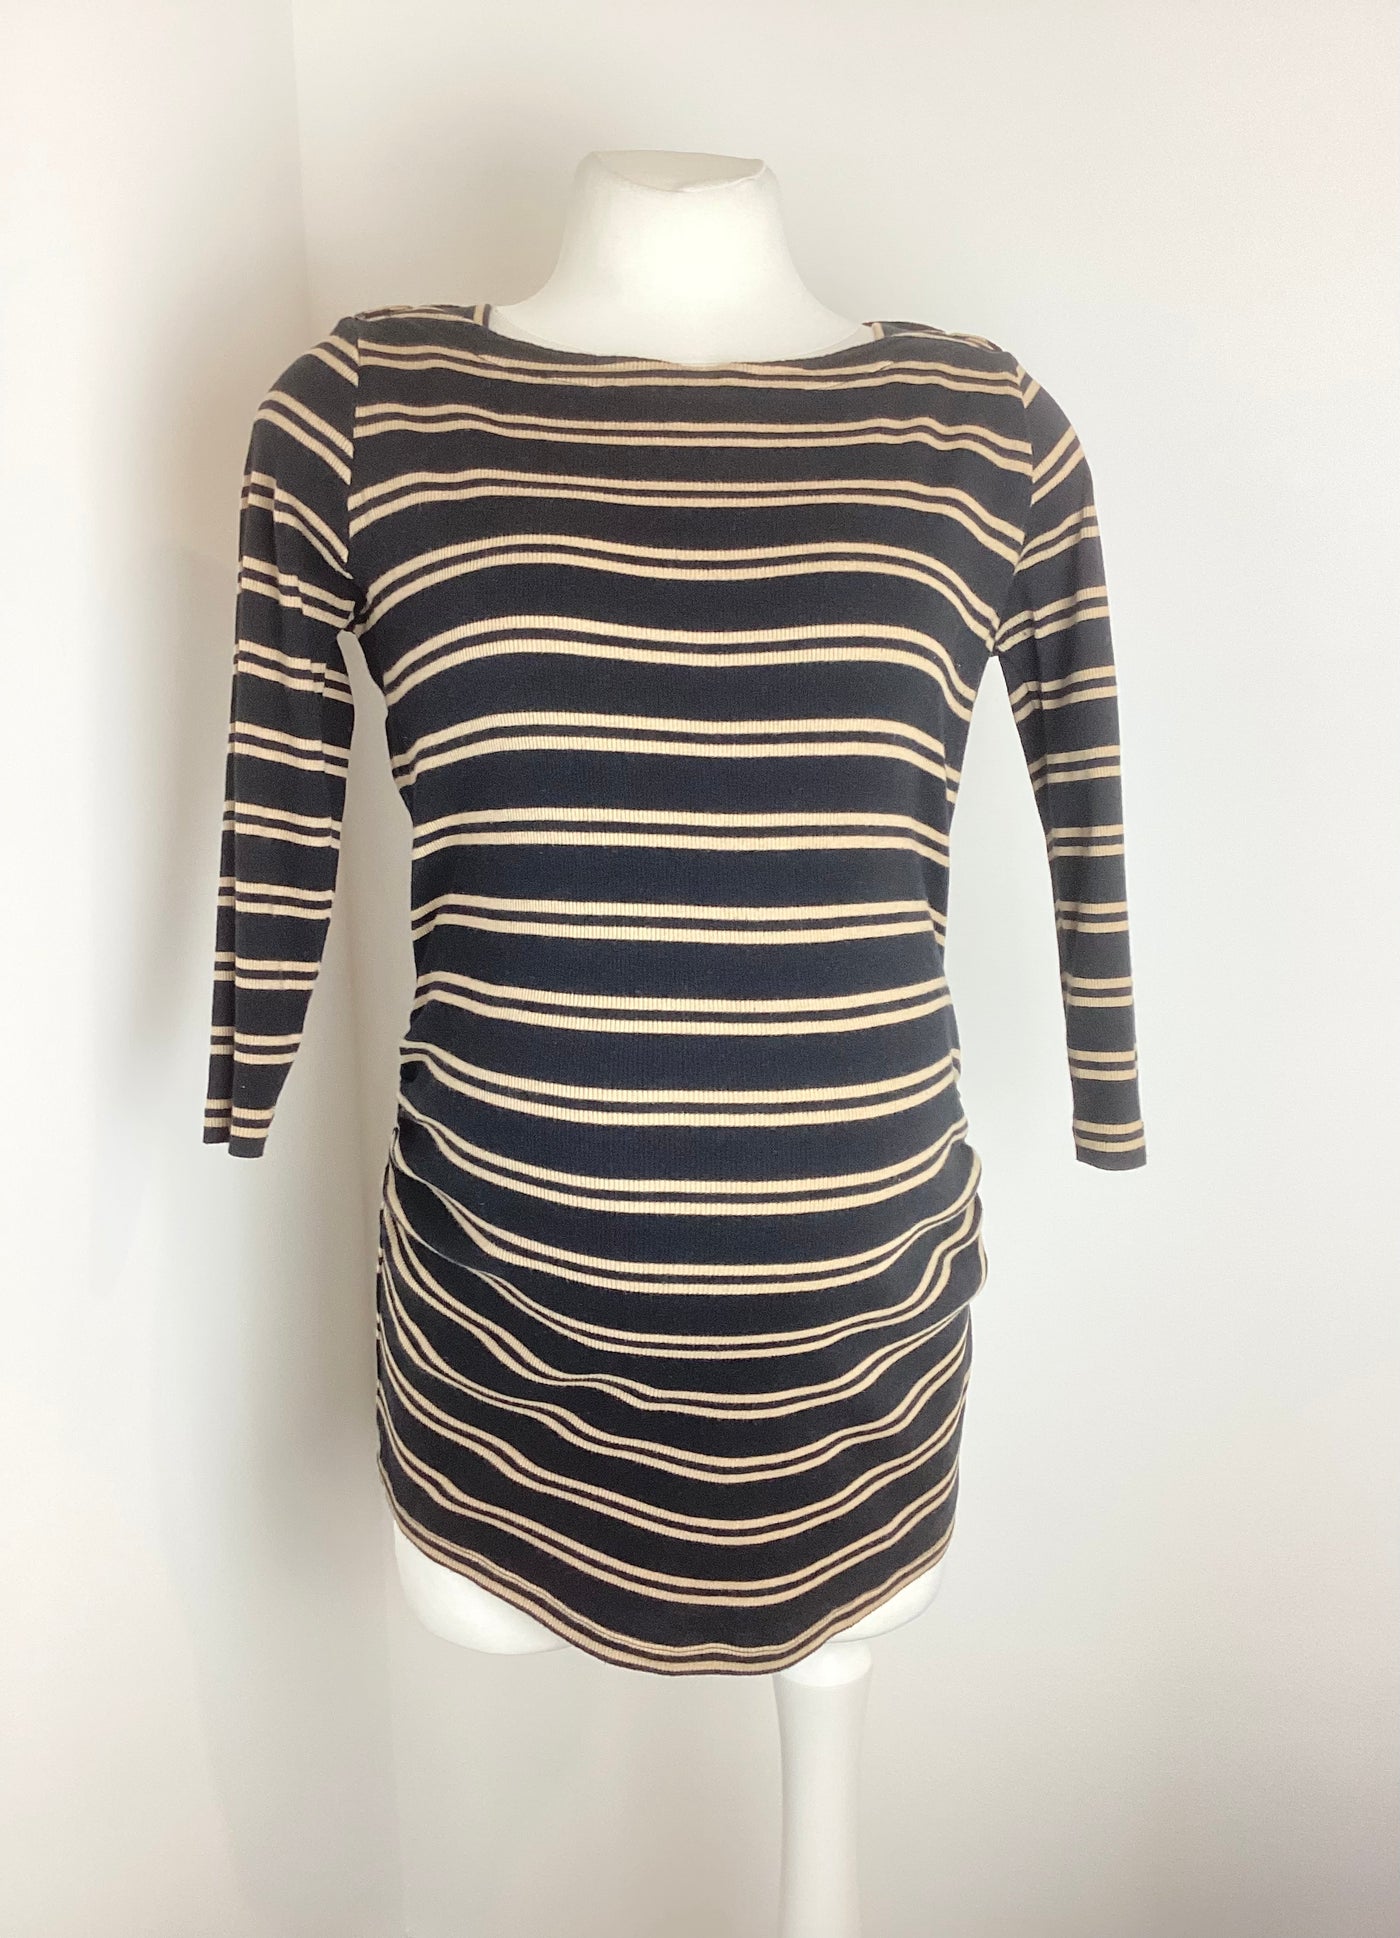 New Look Maternity black & camel striped 3/4 sleeve top - Size 12